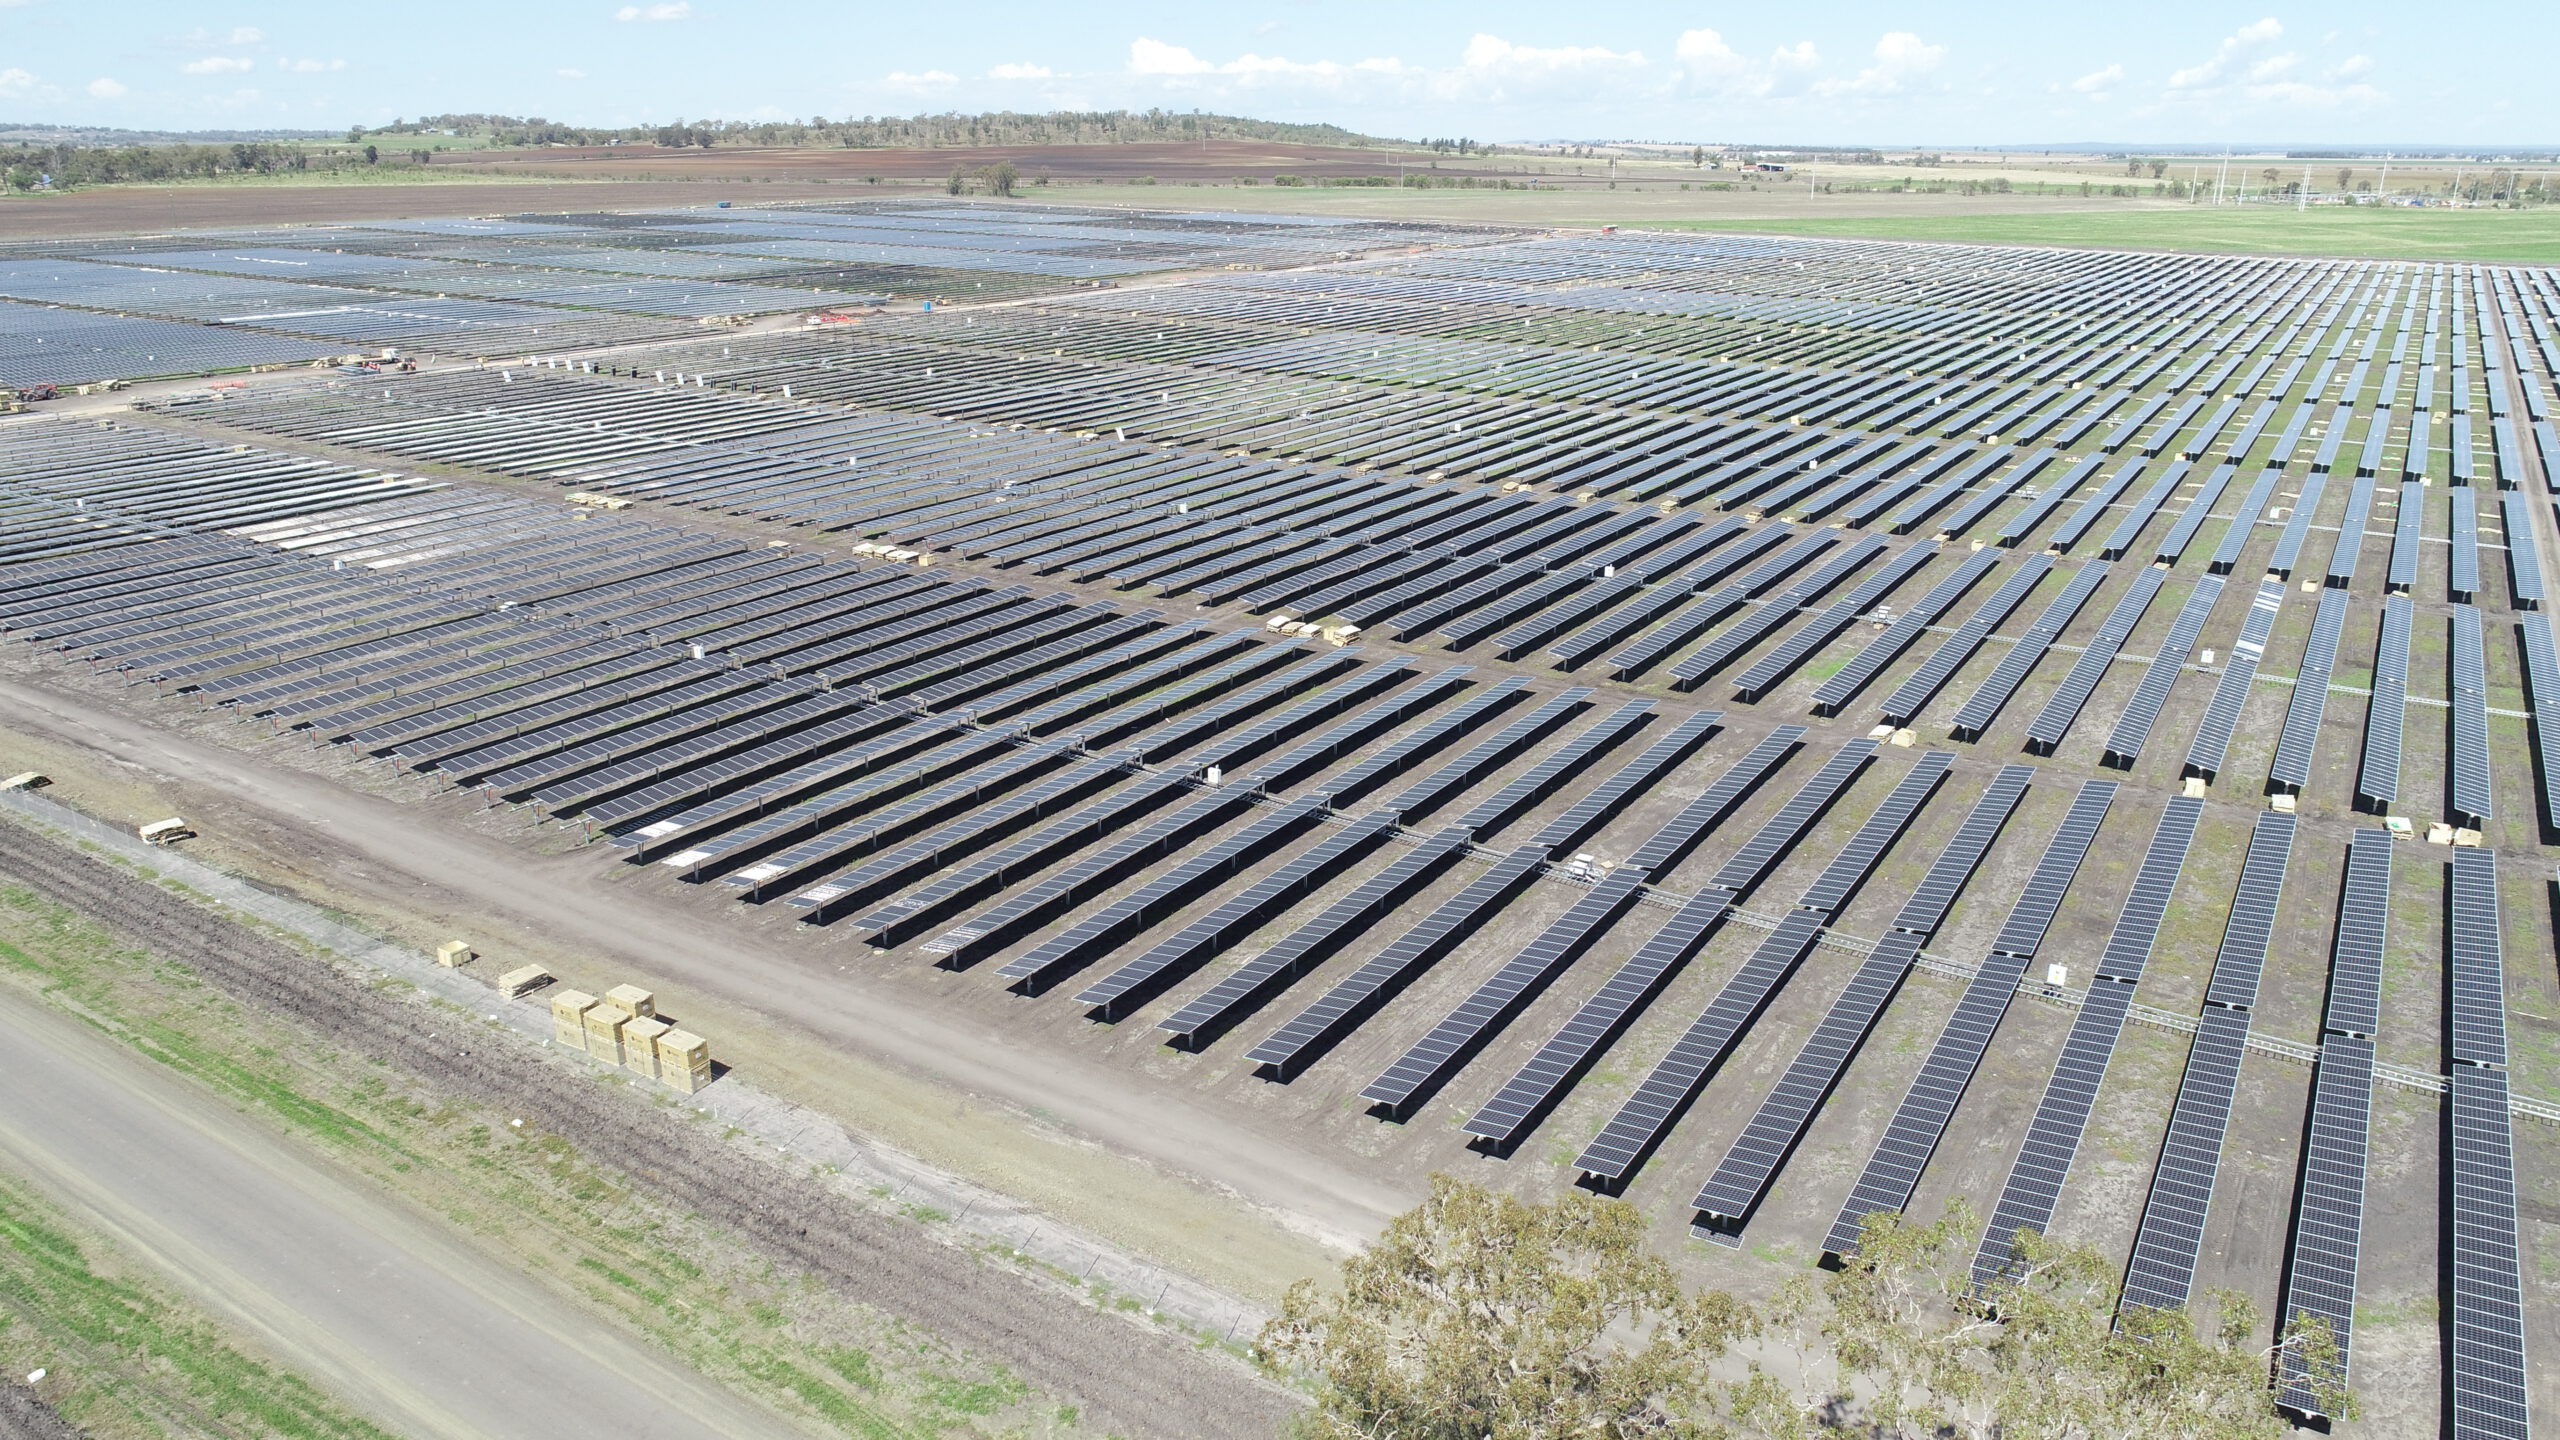 This is a photograph of a completed solar farm during the day, showing the panels are reacting to the positioning of the sun.